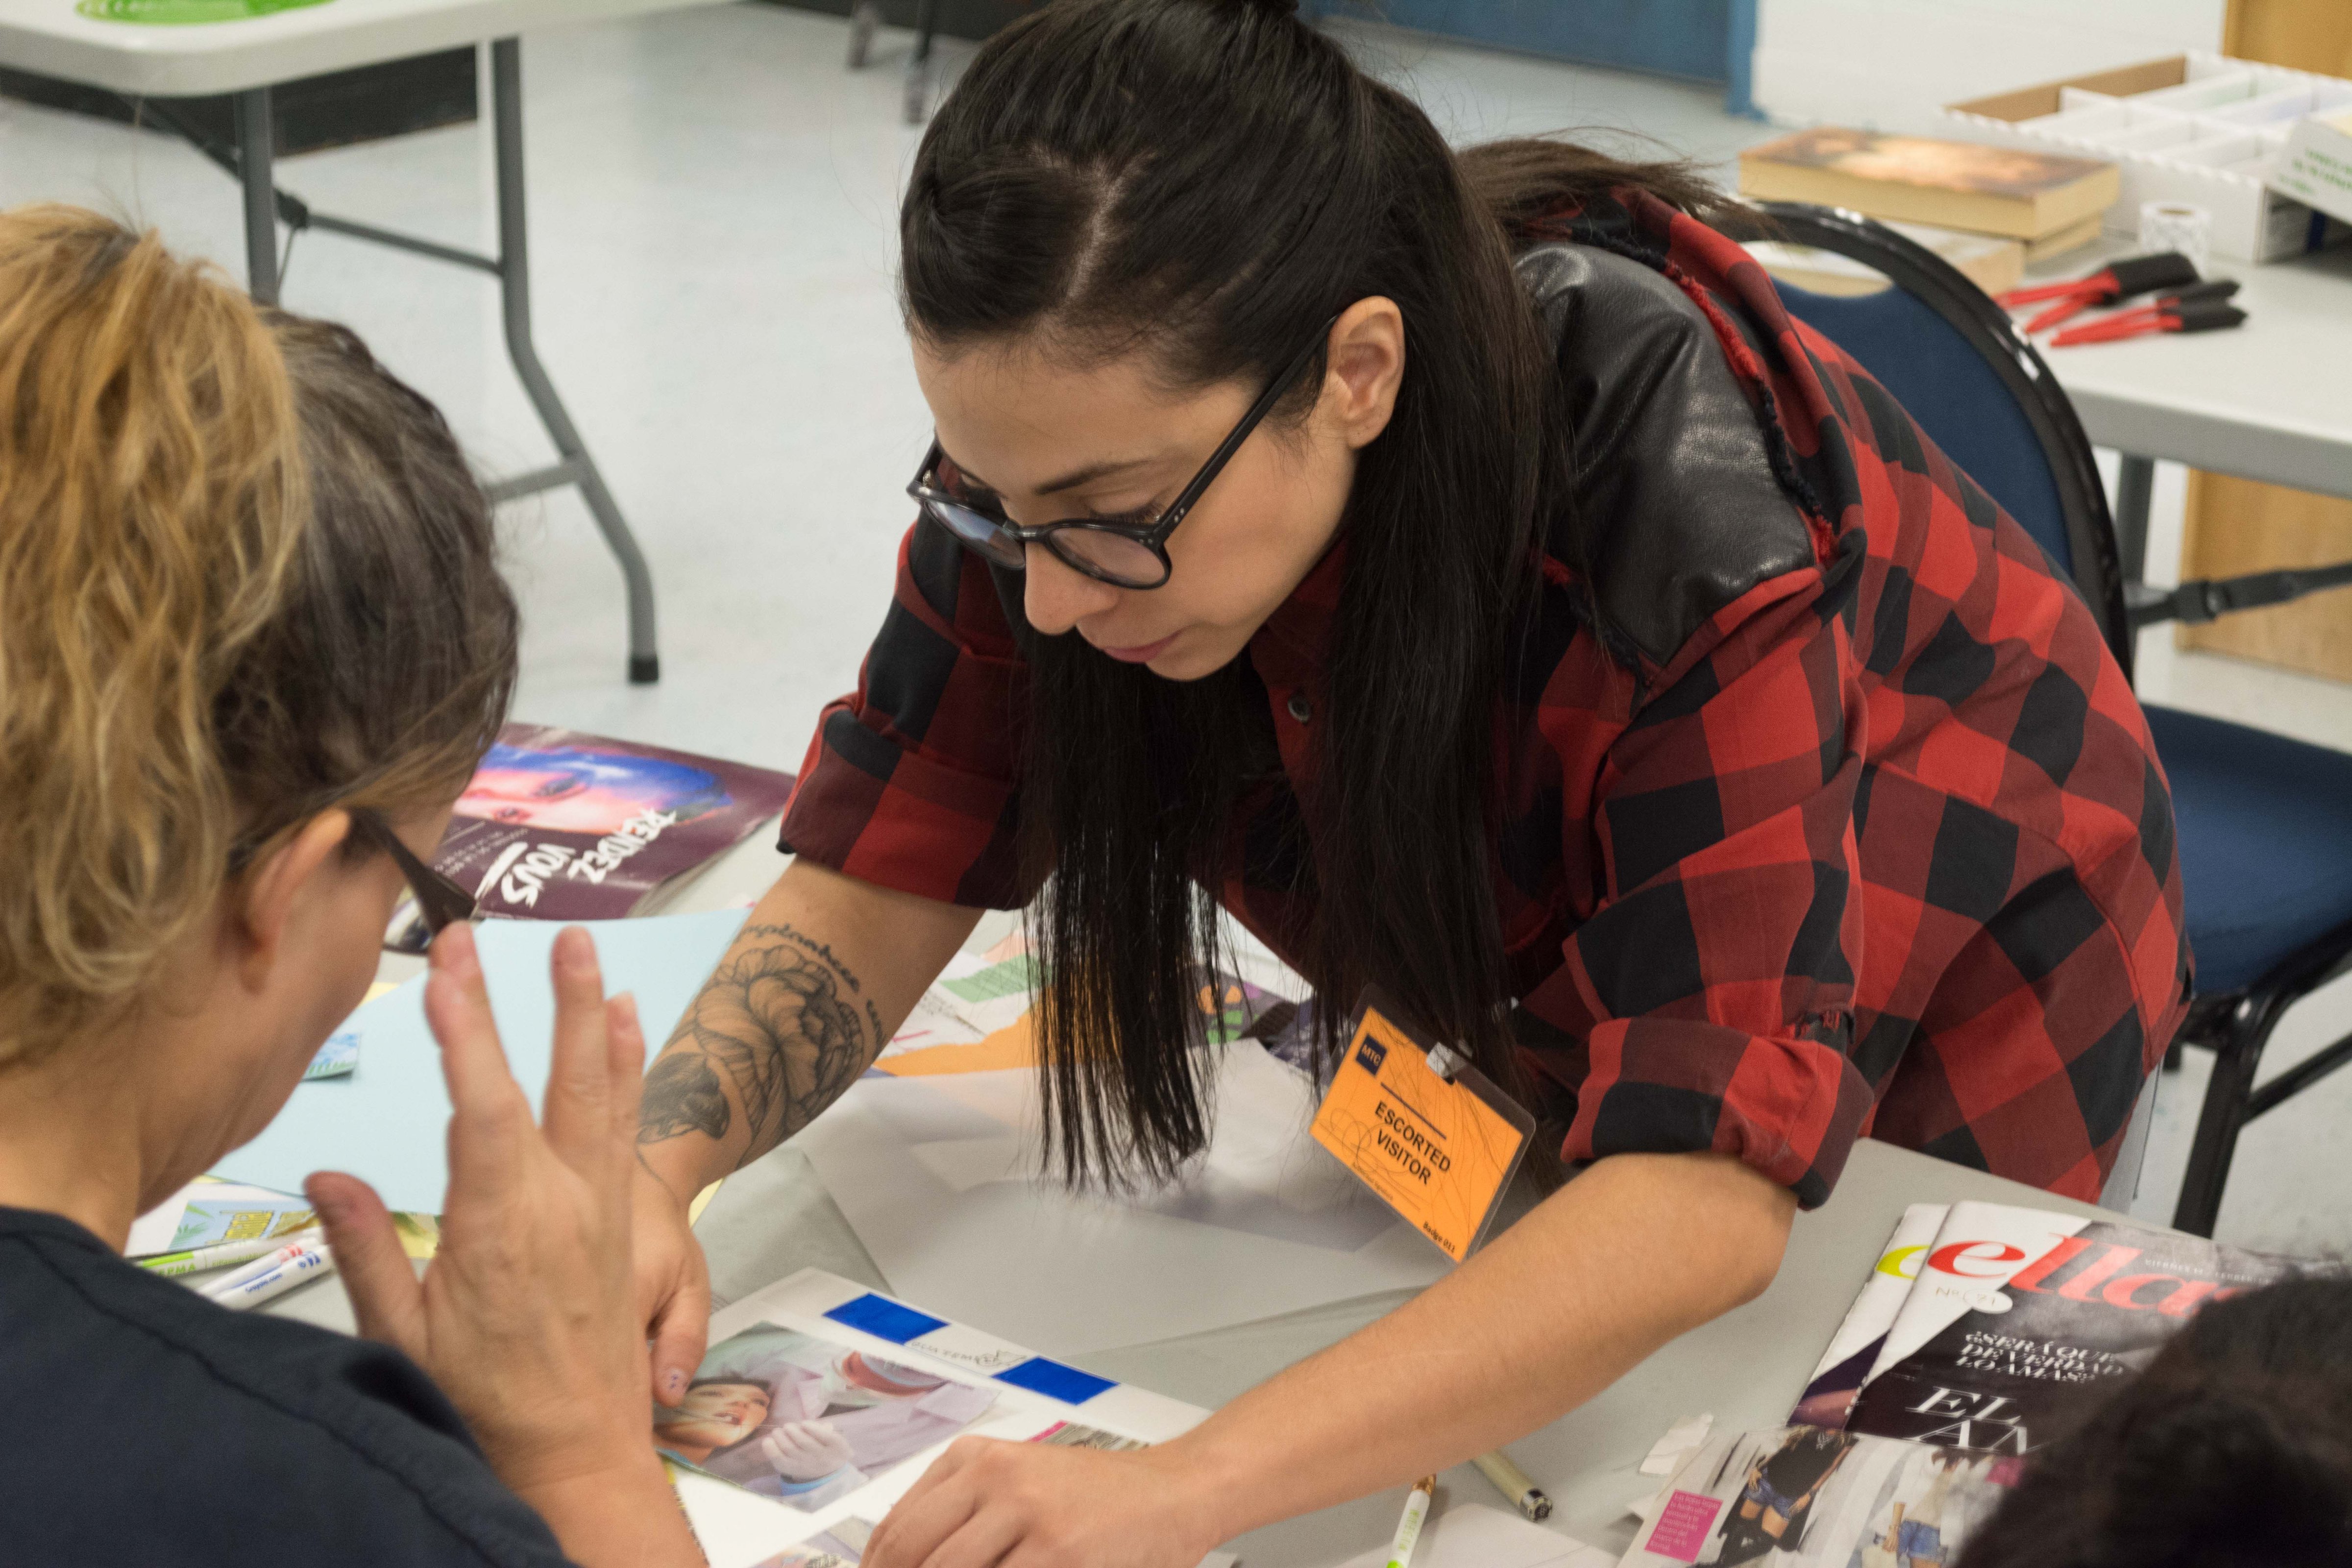 Artist Haydee Alonso hosts an art workshop at the Otero County Prison housing migrant women awaiting asylum proceedings in 2016. (Courtesy Edgar Picazo)